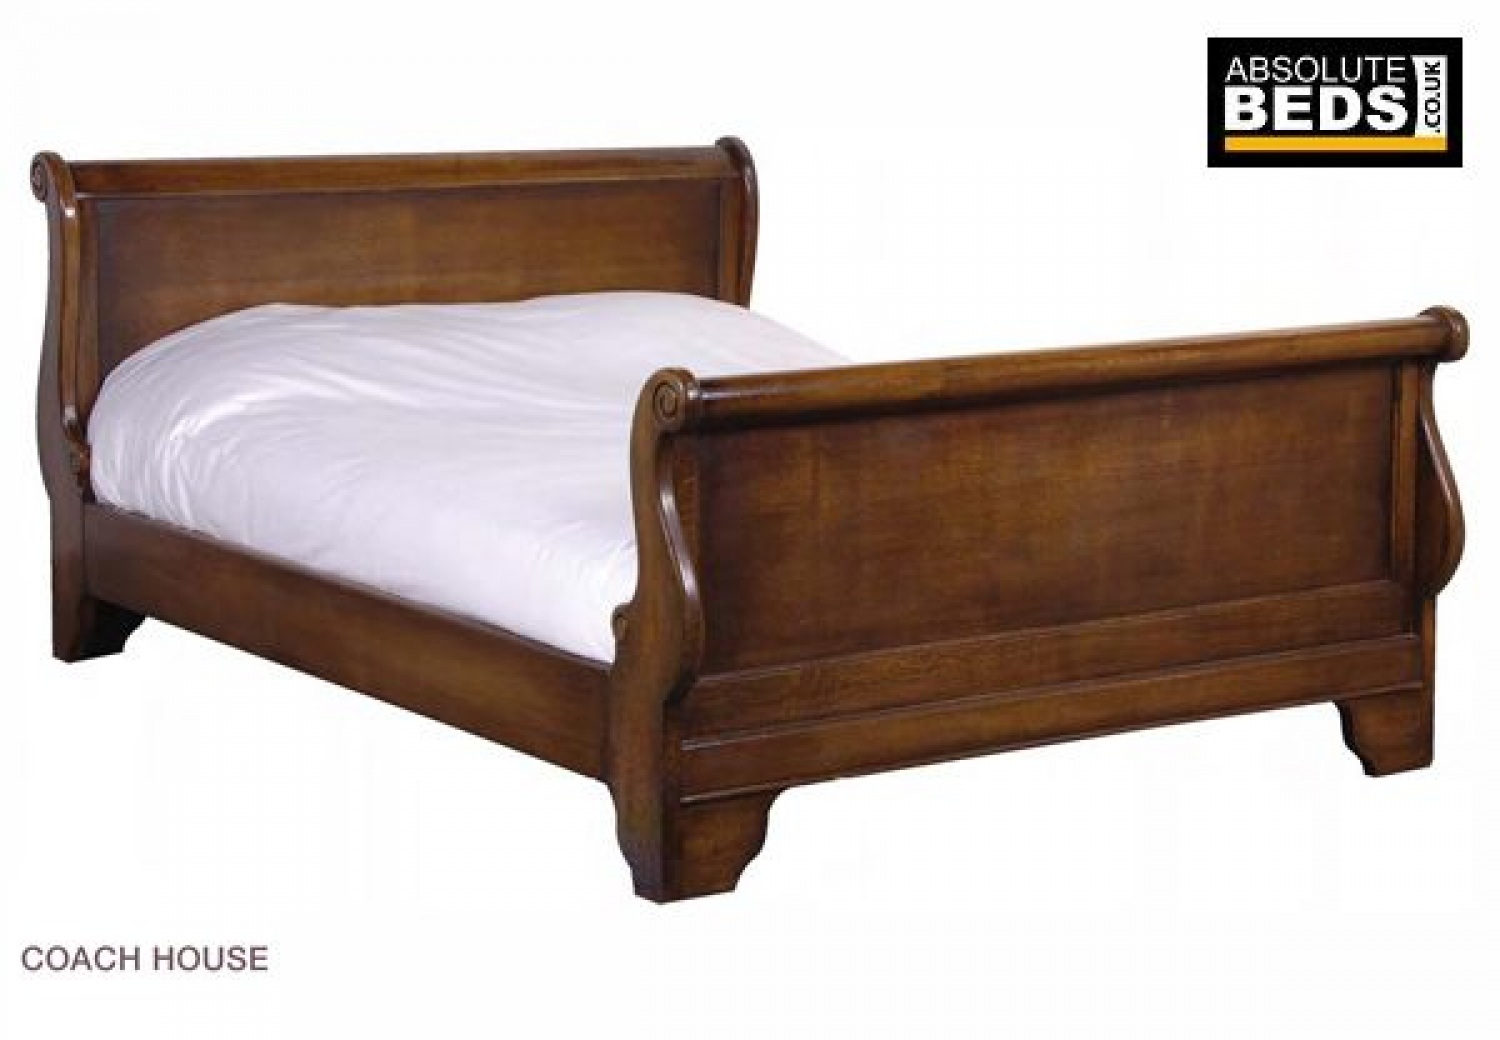 Classic house cheltenham sleigh bed frame, Invest in a Bed and Mattresses that are right for you. At absolute beds you can built your own bespoke comfort Malaga image